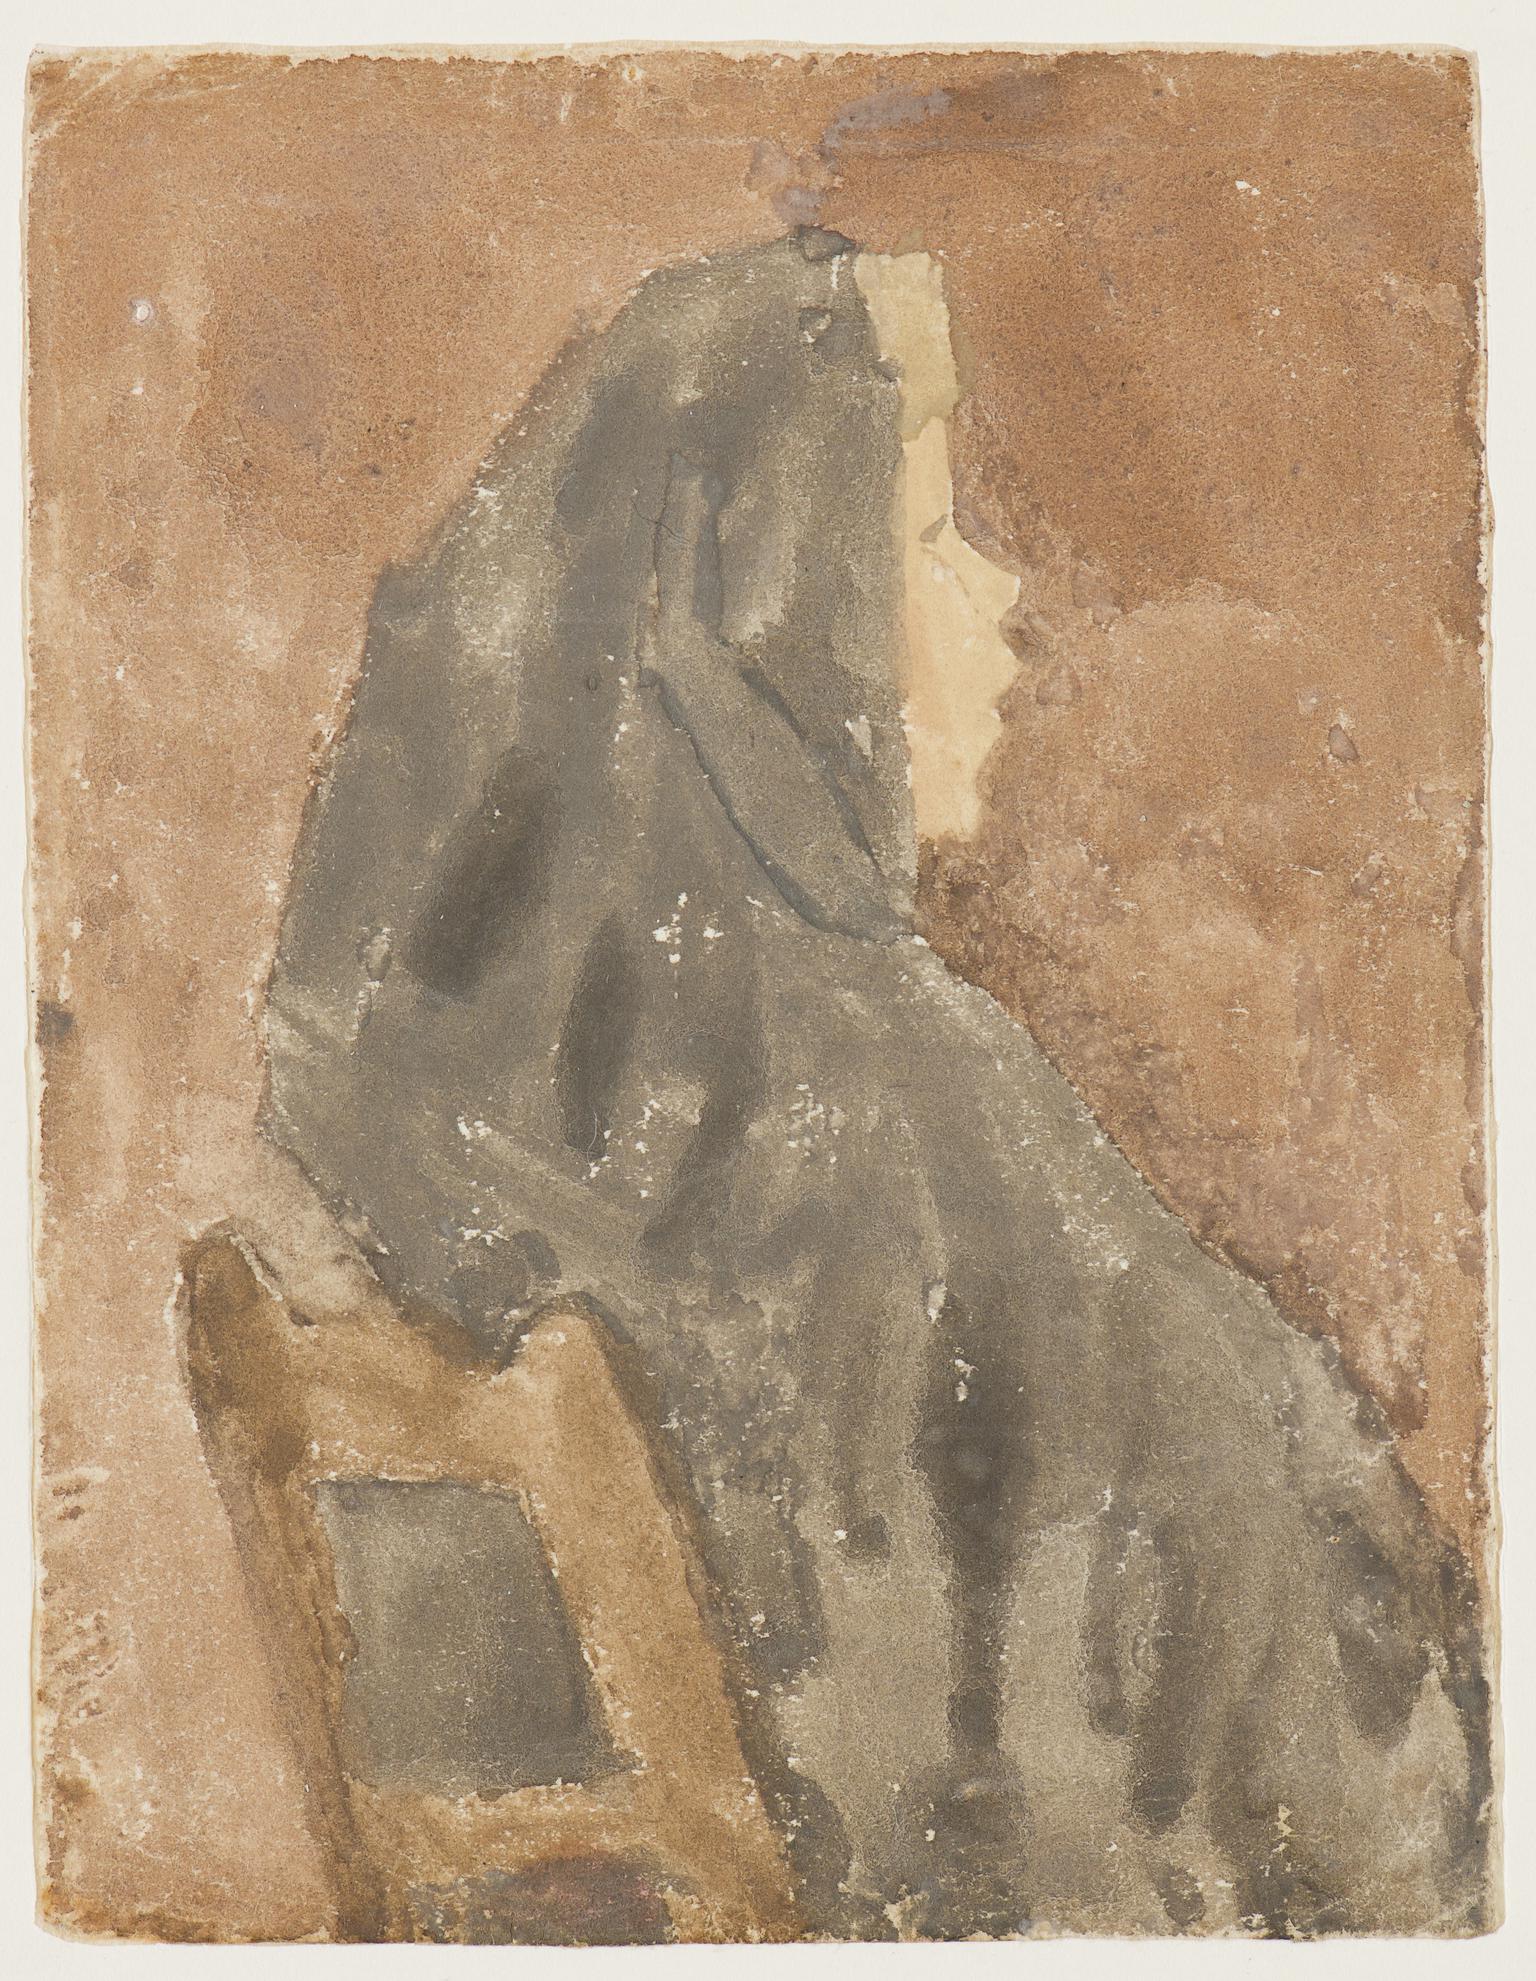 Seated lady in church